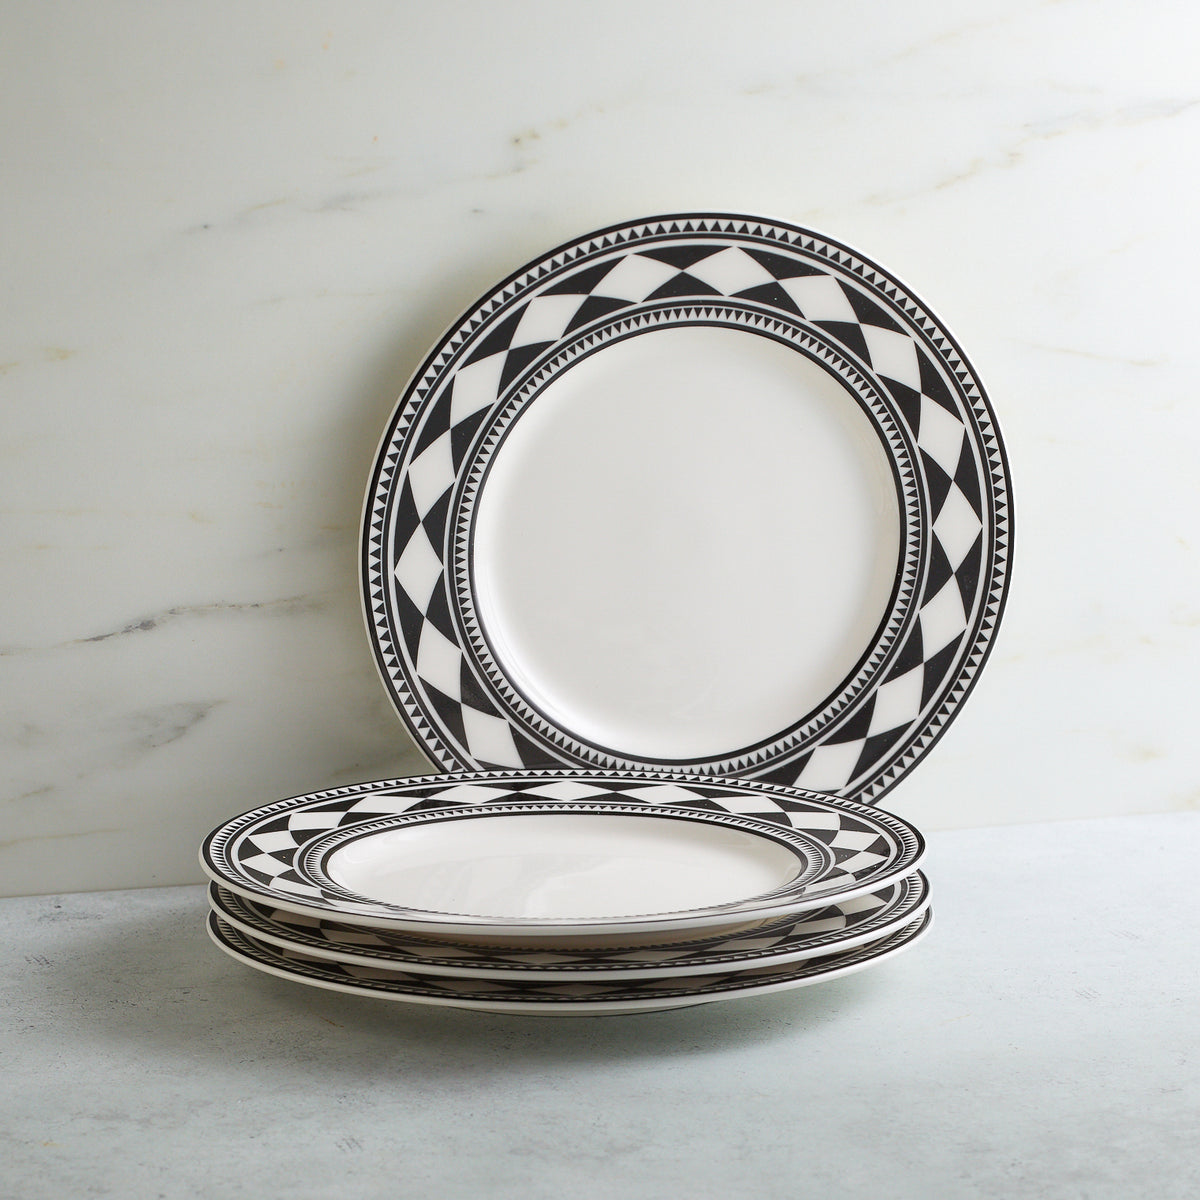 Stack of four Fez Rimmed Salad Plates by Caskata Artisanal Home with a sophisticated global feel and timeless shape, adorned with bold geometric patterns on the rim, positioned on a light-colored surface in front of a white marble background.